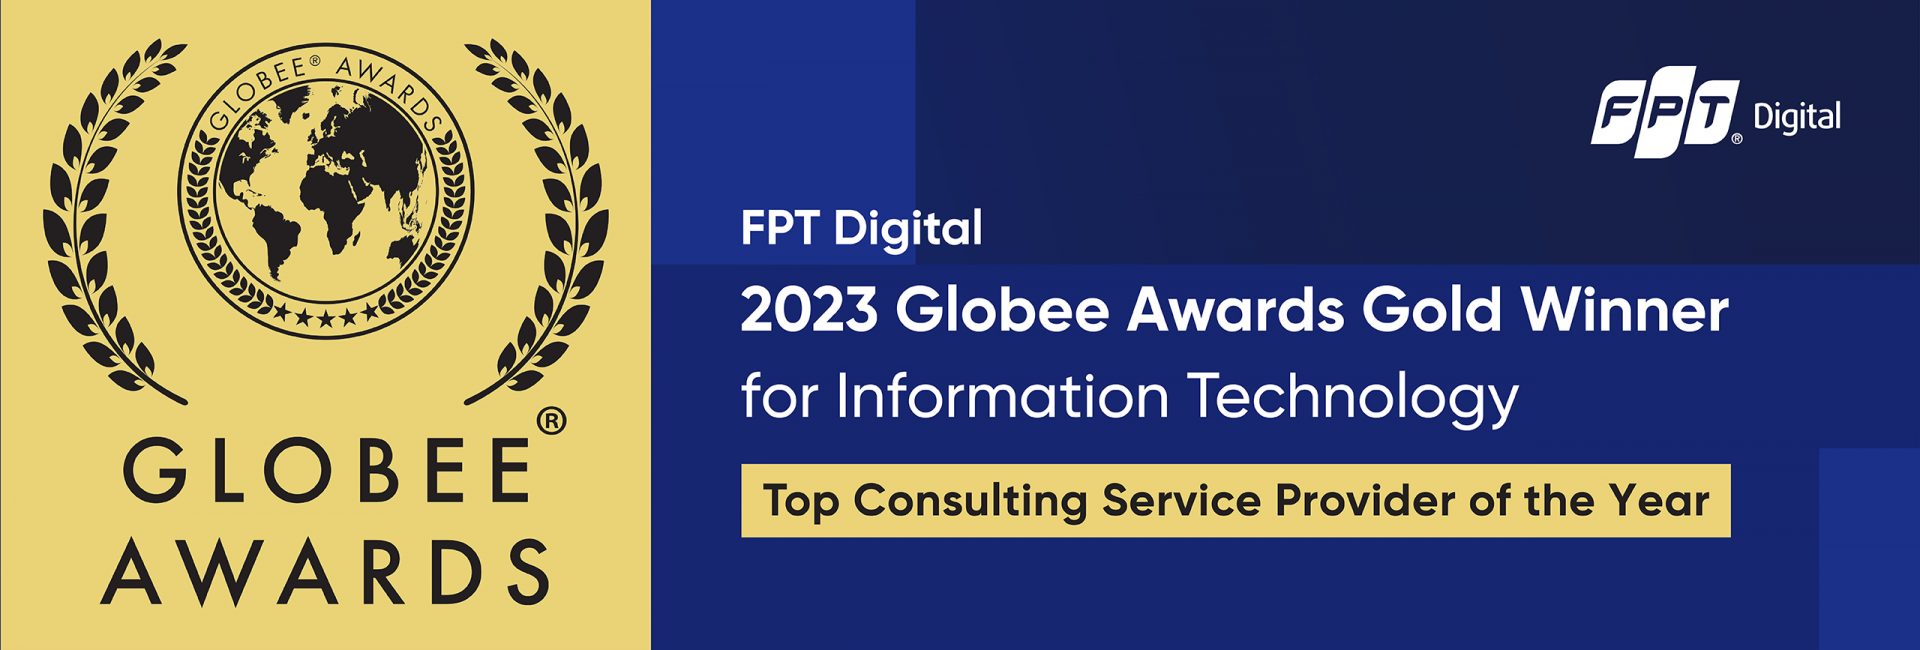 FPT Digital received international Gold certification for Consulting Service Provider of the Year 2023.